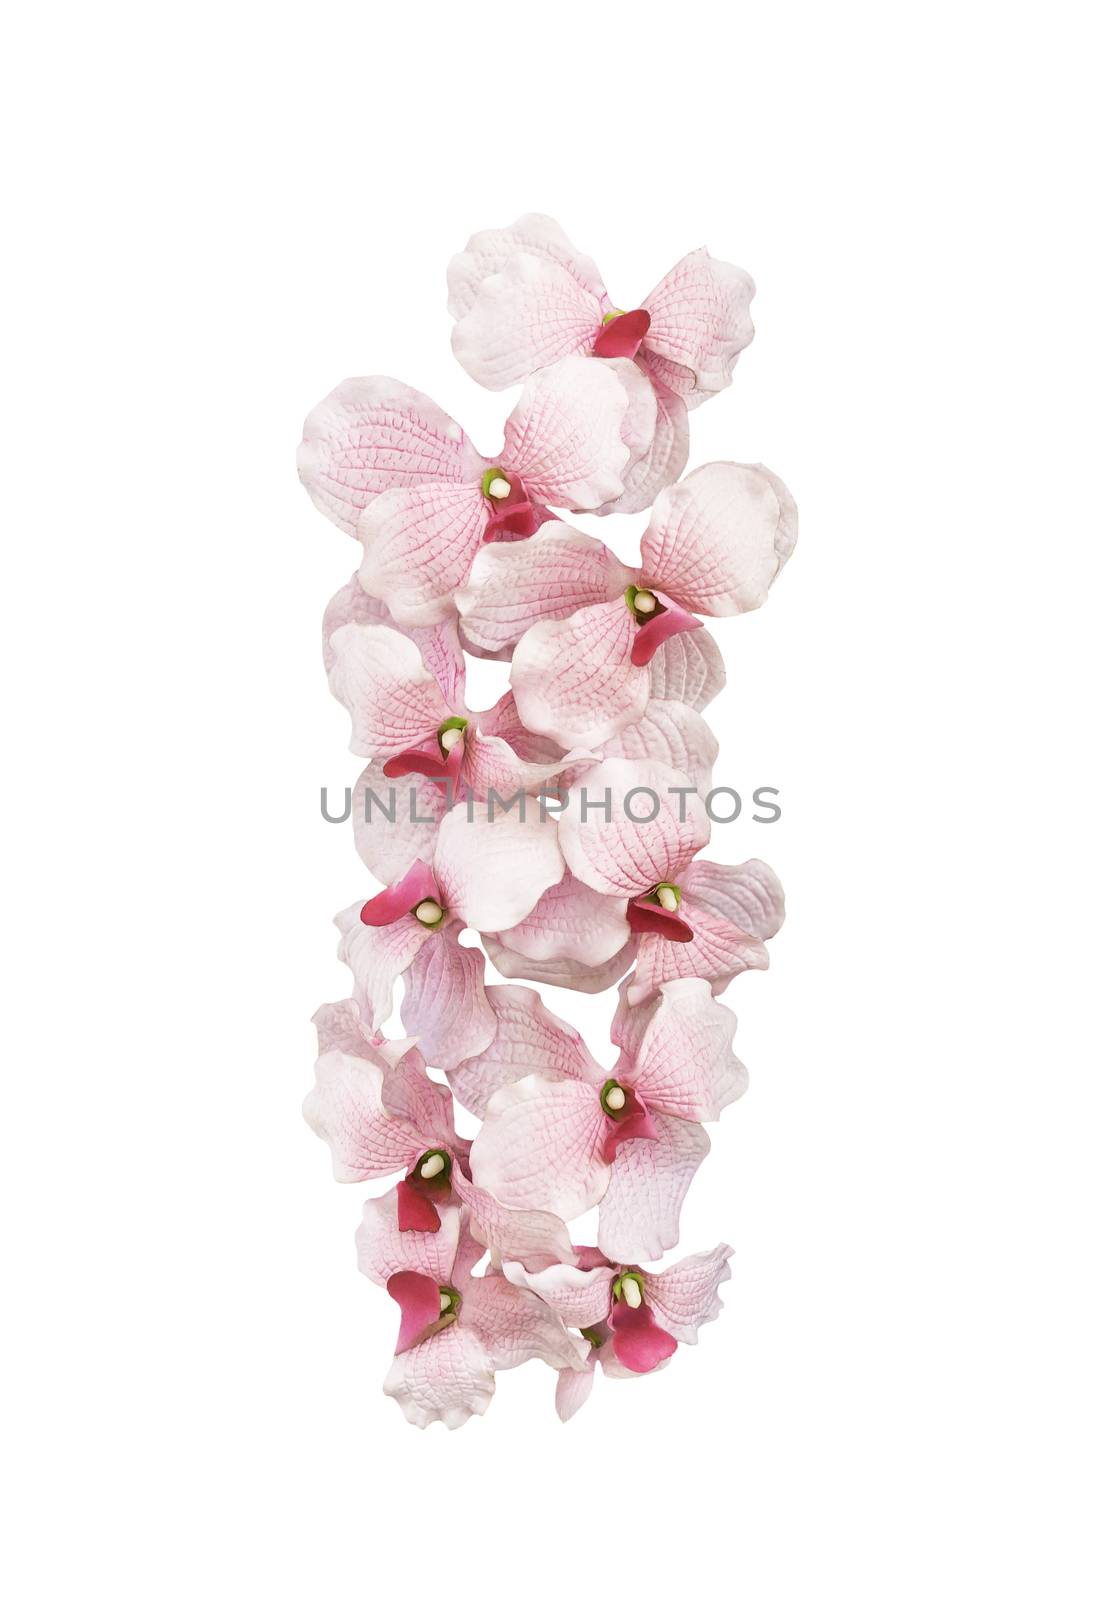 Artifical pink orchid flowers isolated on white background